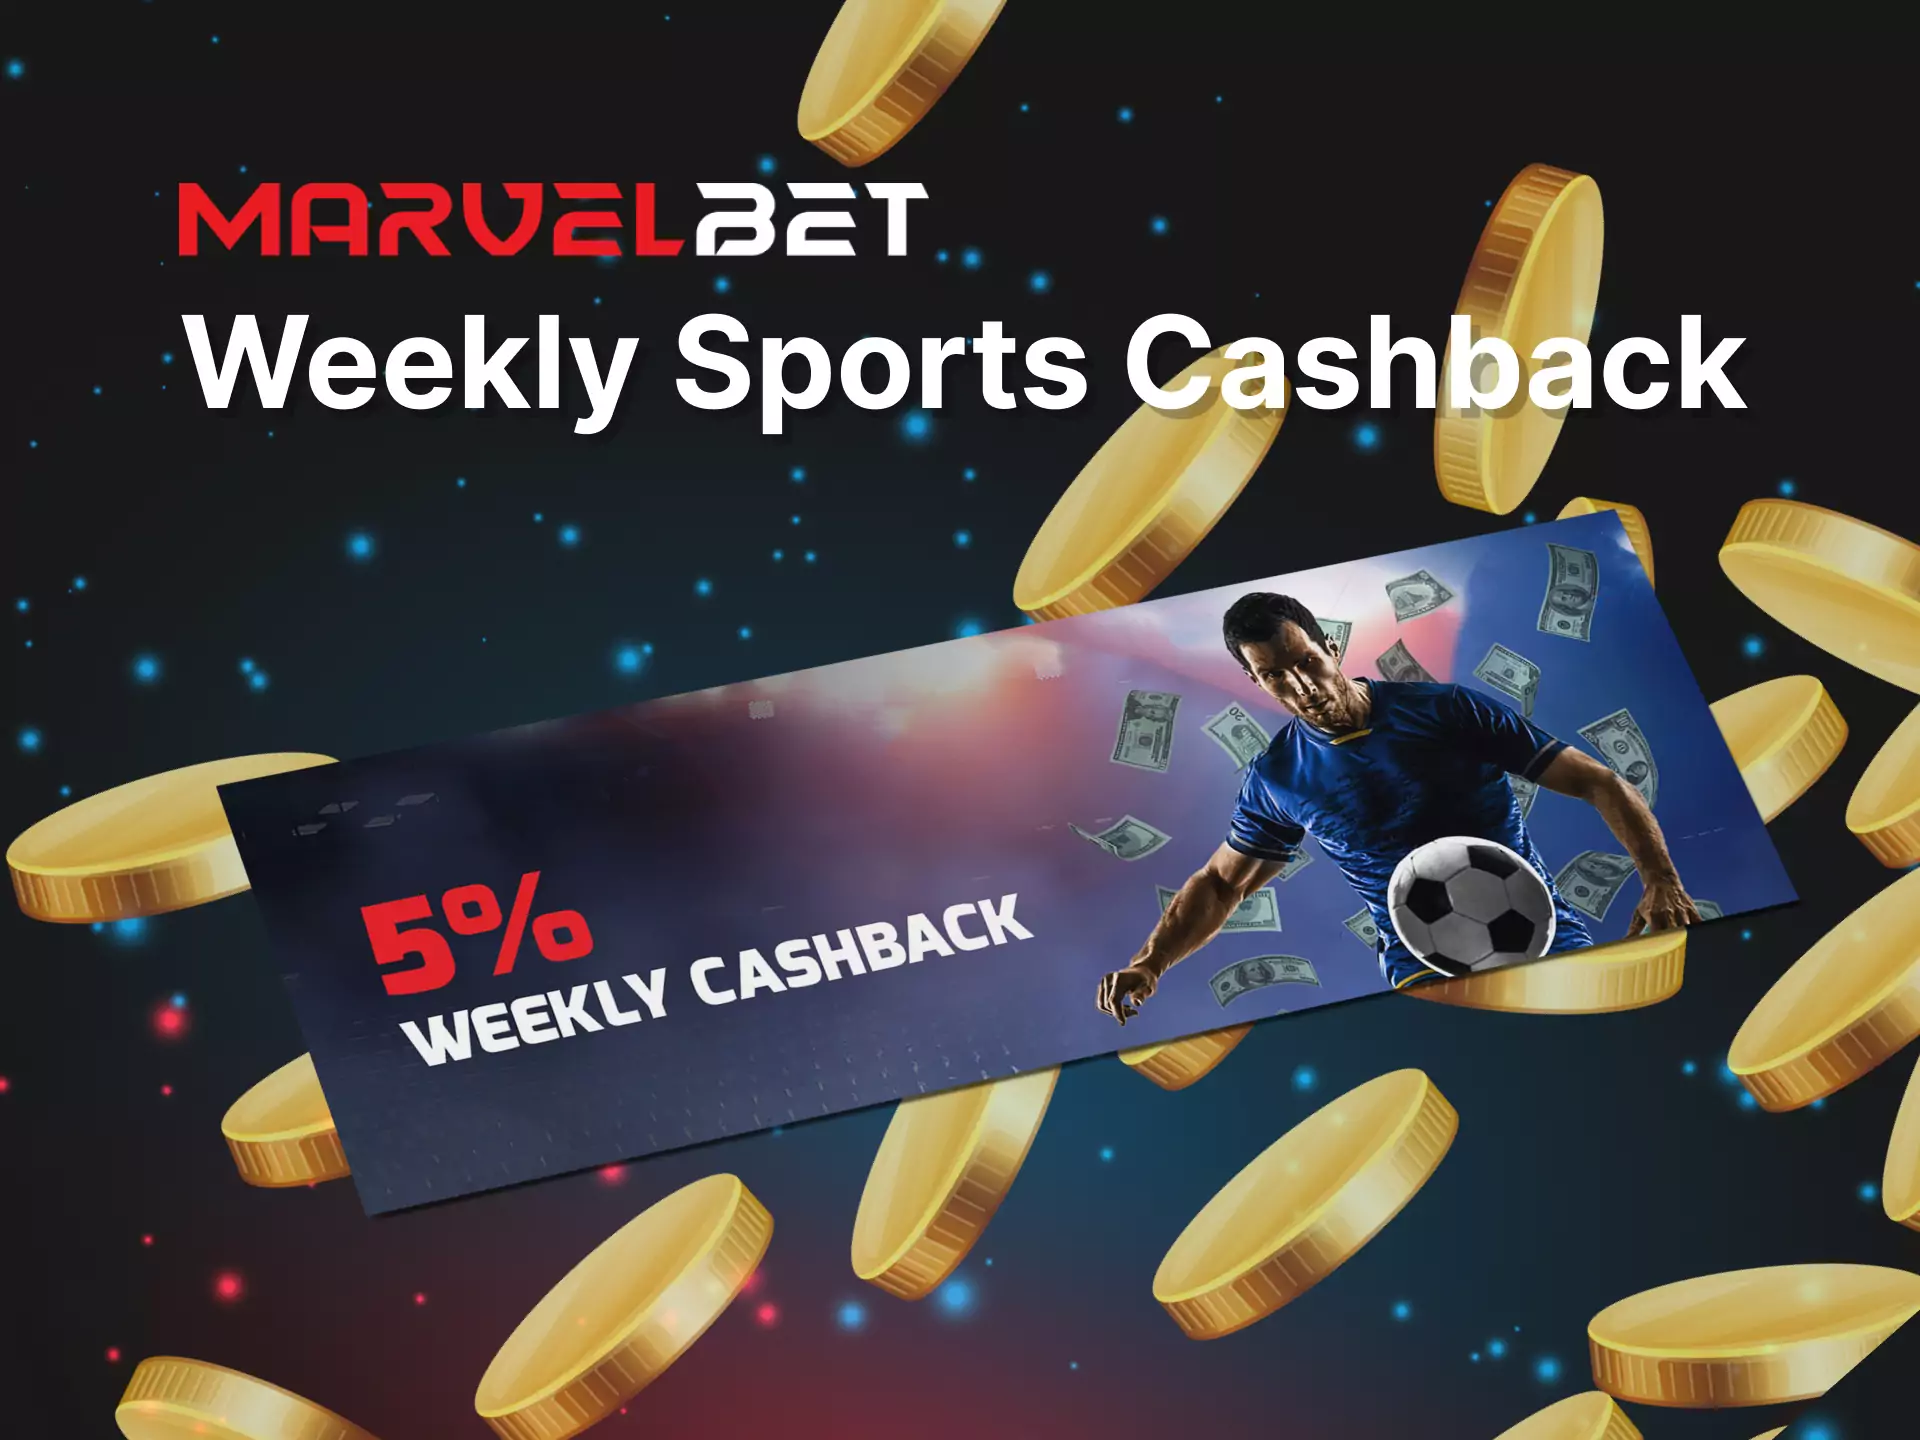 Place bets in the Marvelbet sportsbook and get a weekly cashback.